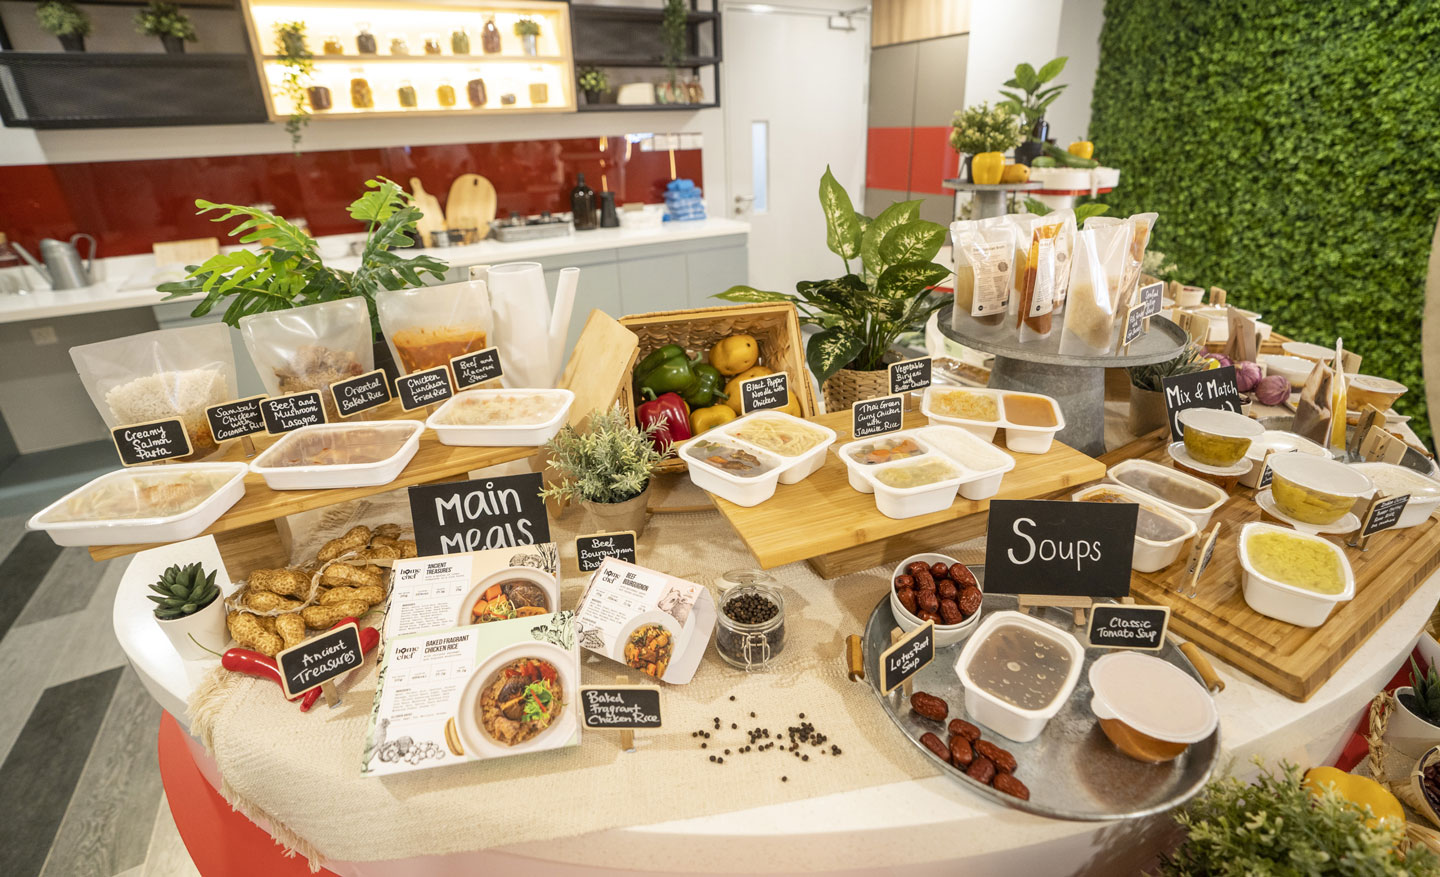 A display of an assortment of main meals and soups 